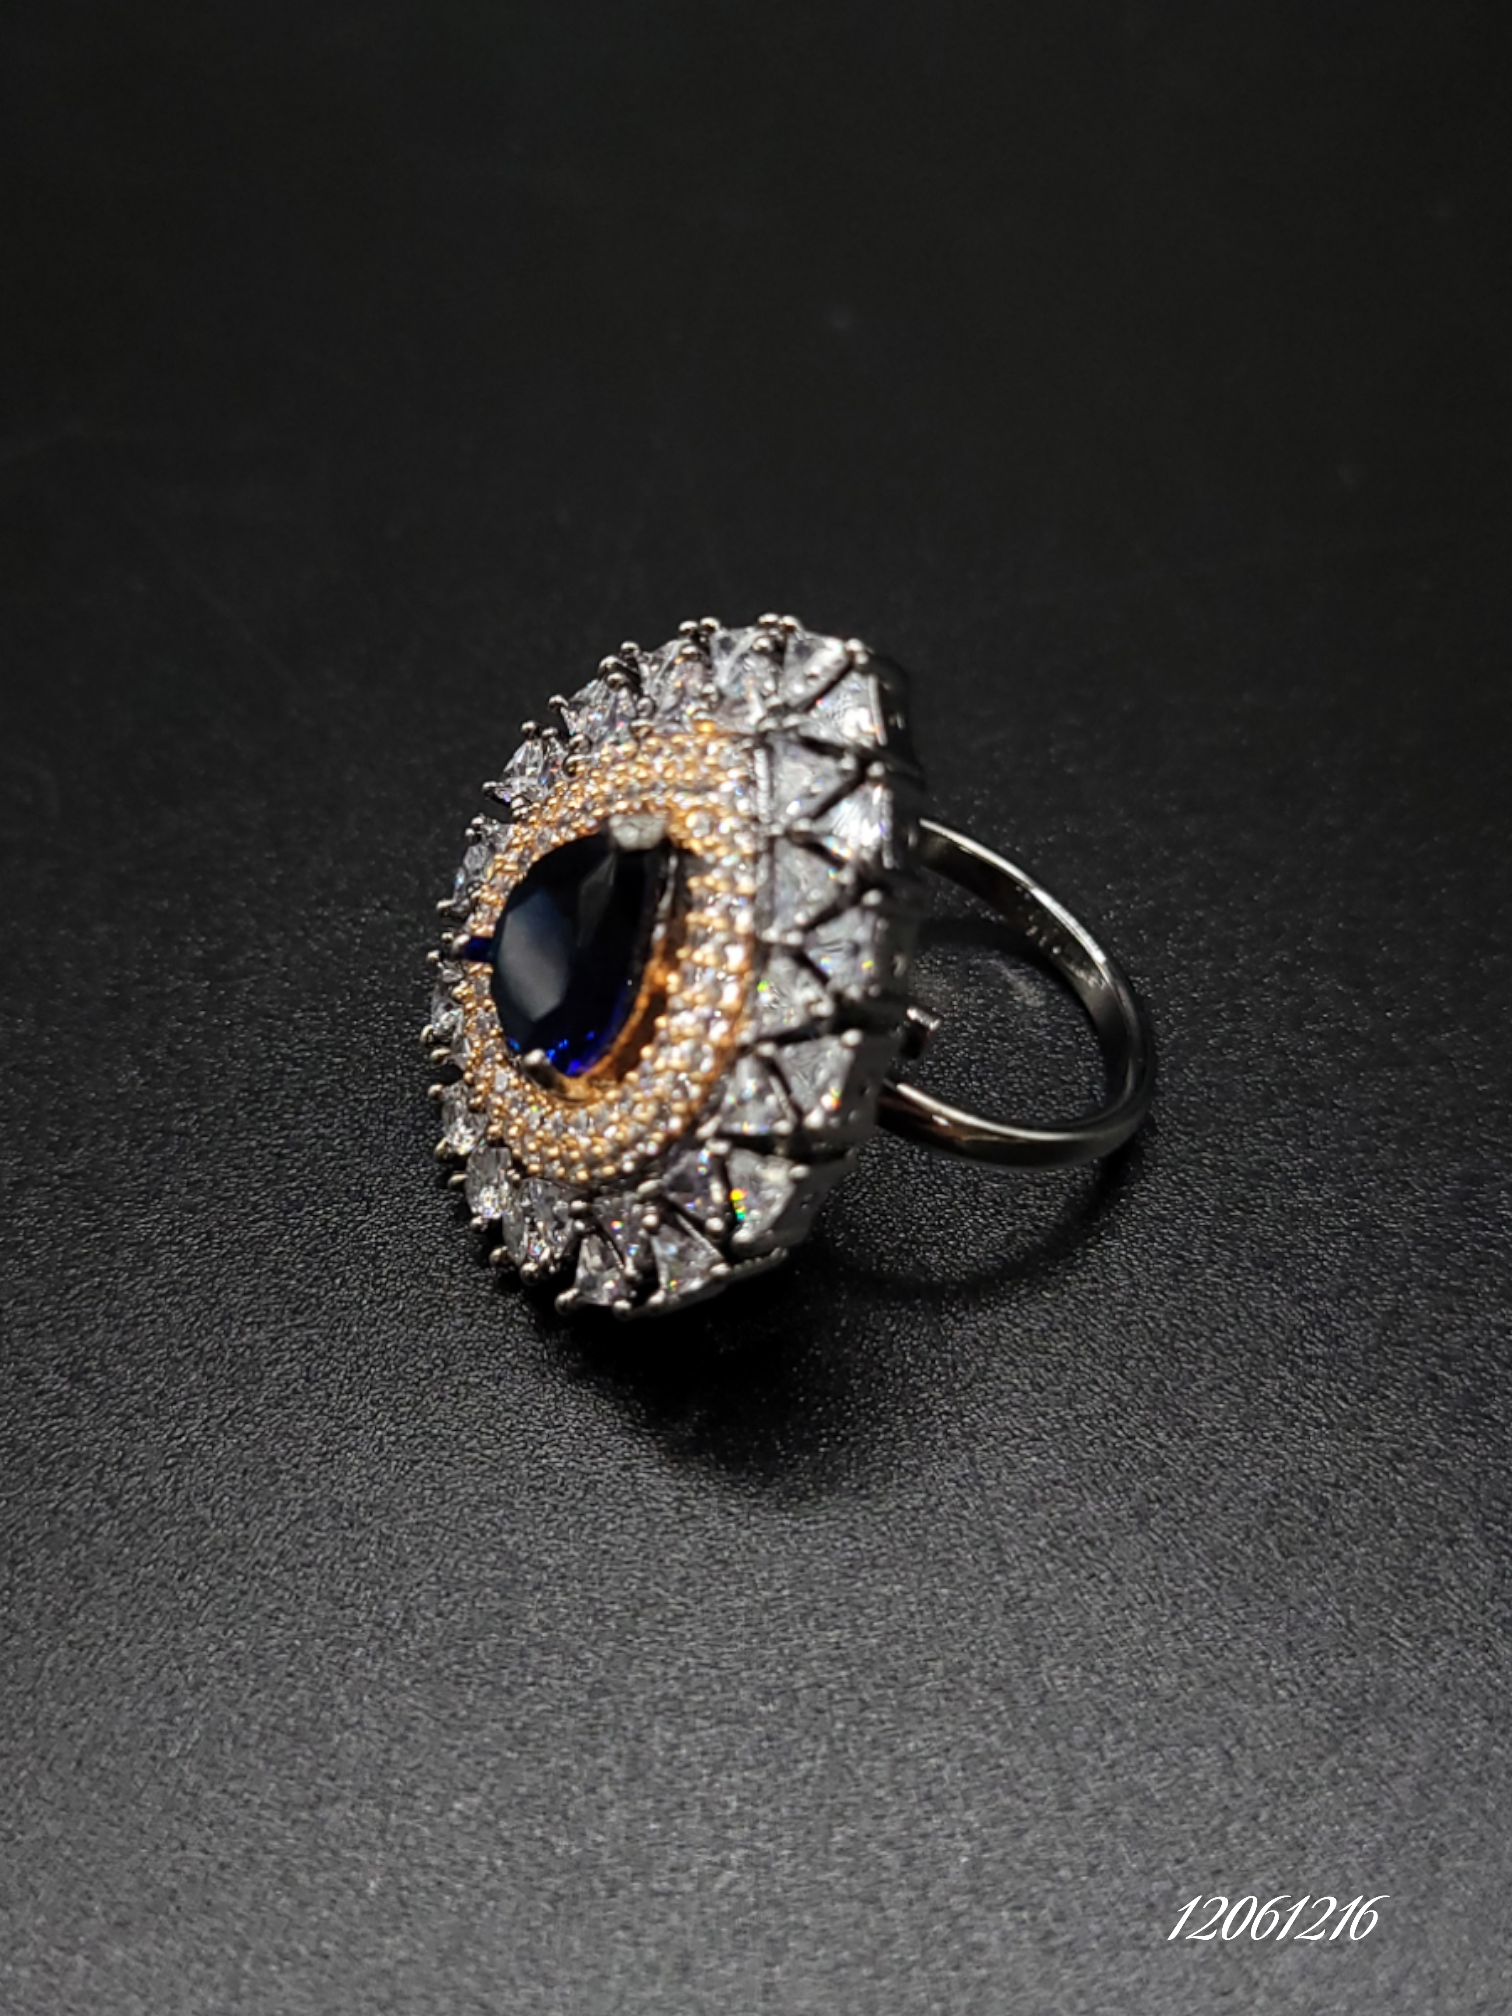 EYE CATCHING DARK SILVER RING WITH GOLD DIAMONDS AND COLORED STONES